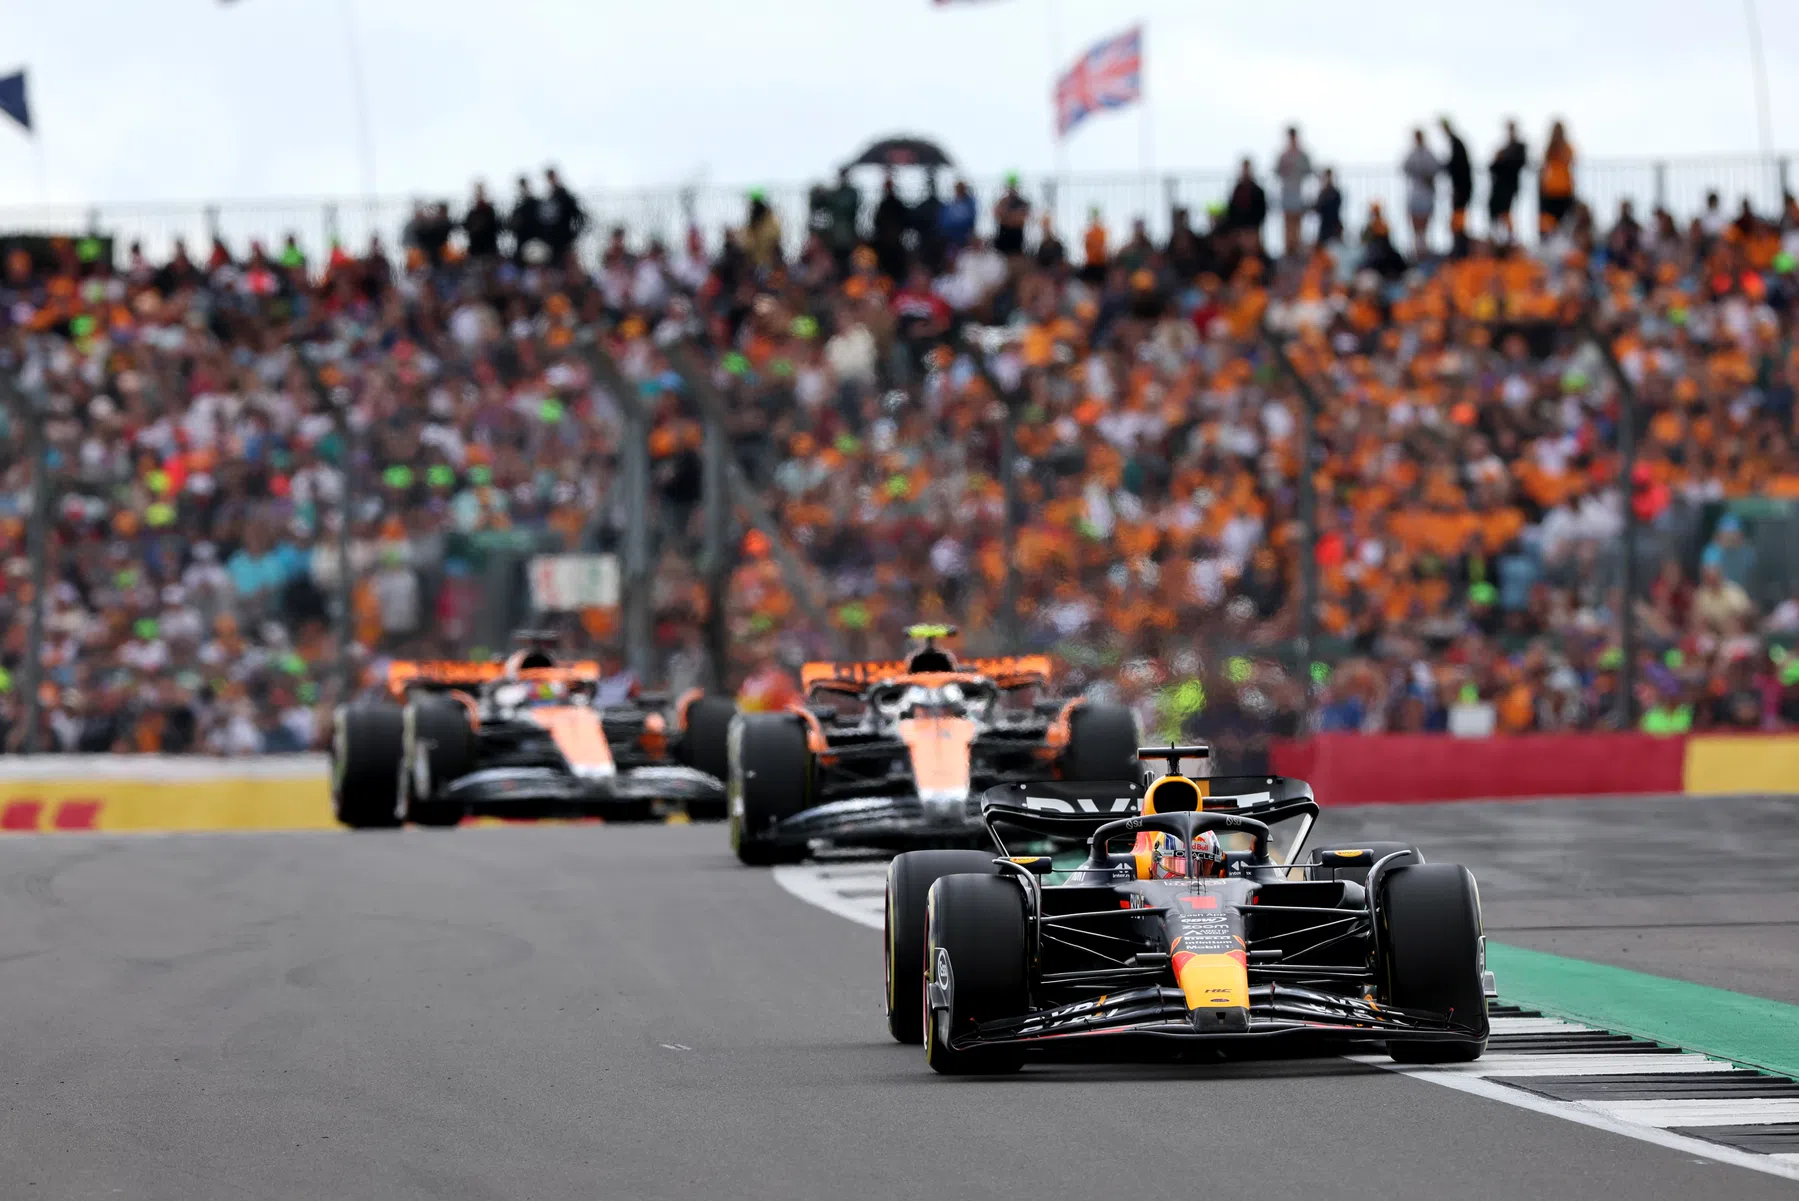 Tickets at Silverstone not yet sold out - Red Bull dominance could be why